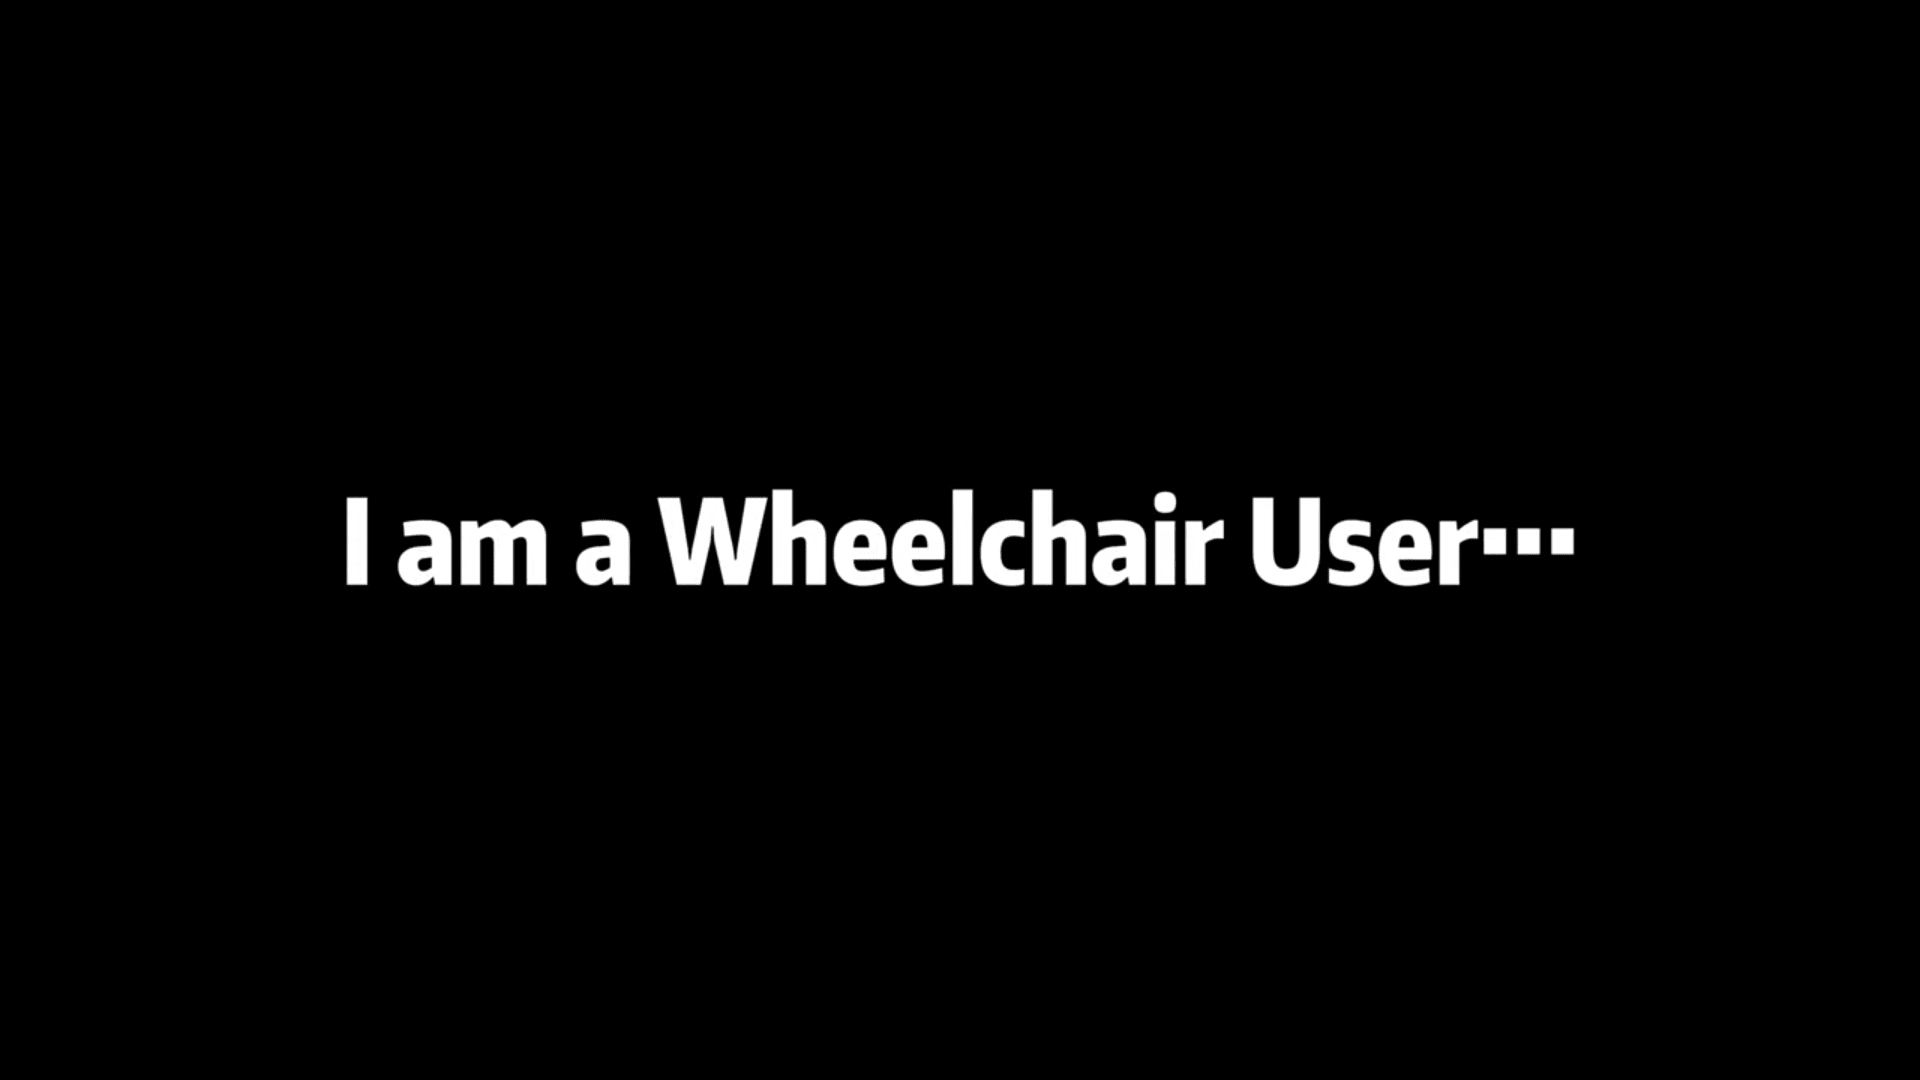 Cover image — title of the video: "I am a Wheelchair User"